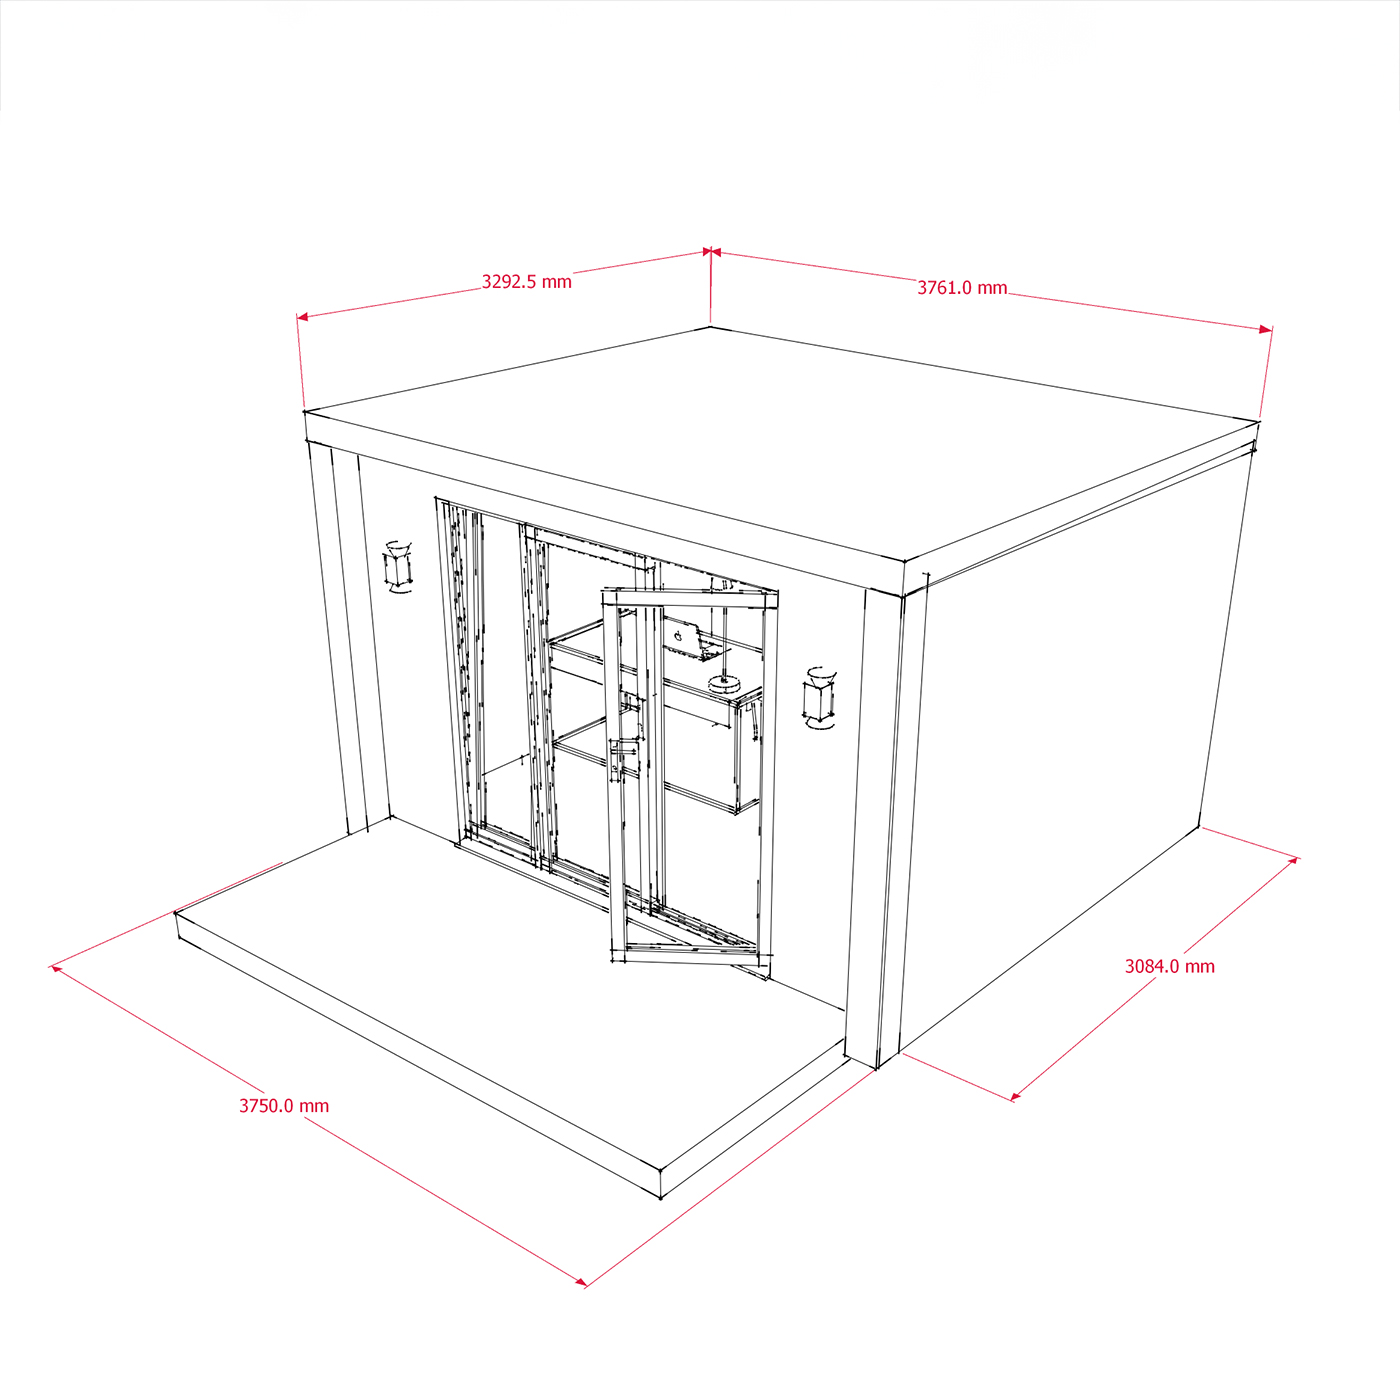 Exterior dimensions of 3.2m by 3.8m garden office